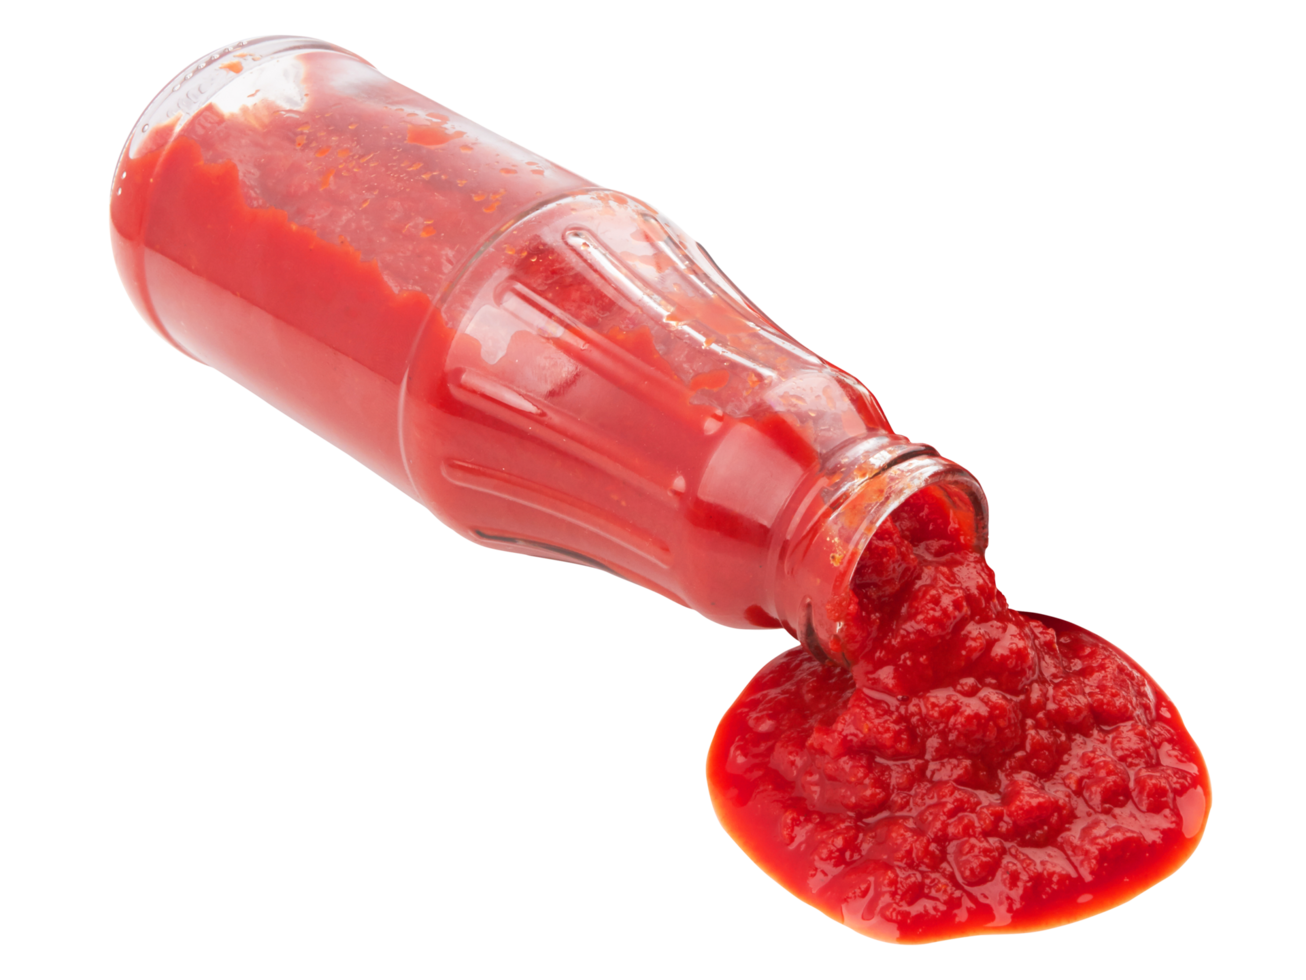 Tomato Ketchup PNG Transparent Images Free Download, Vector Files